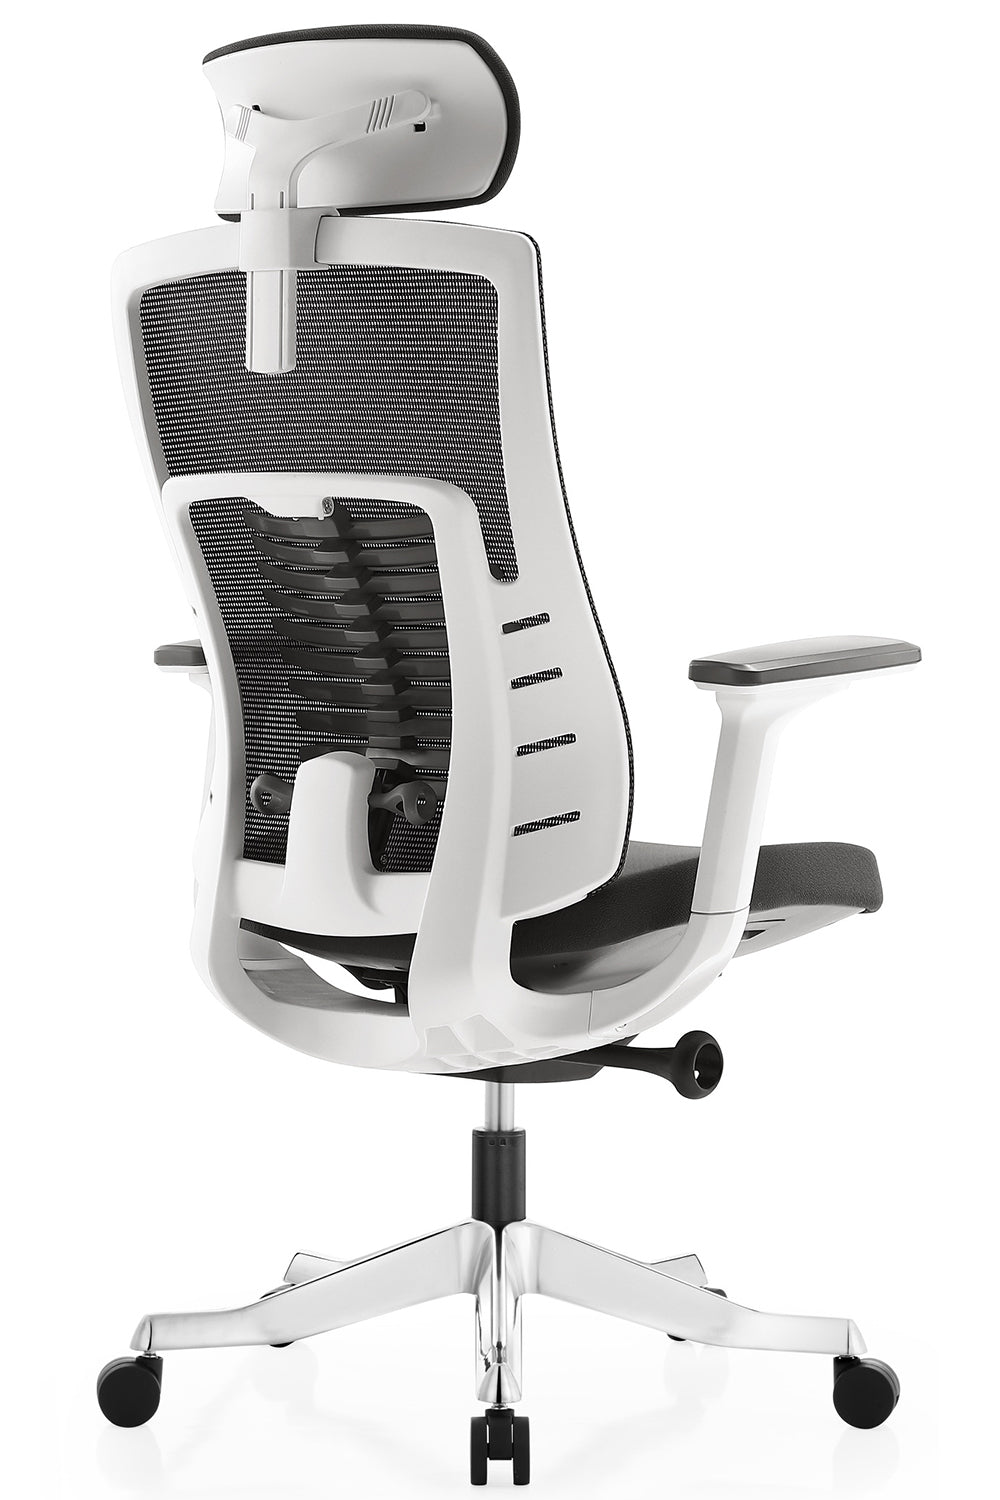 Apollo High Back 3D Workstation Swivel Chair with Cushion Seat And Aluminum die cast Base  - White